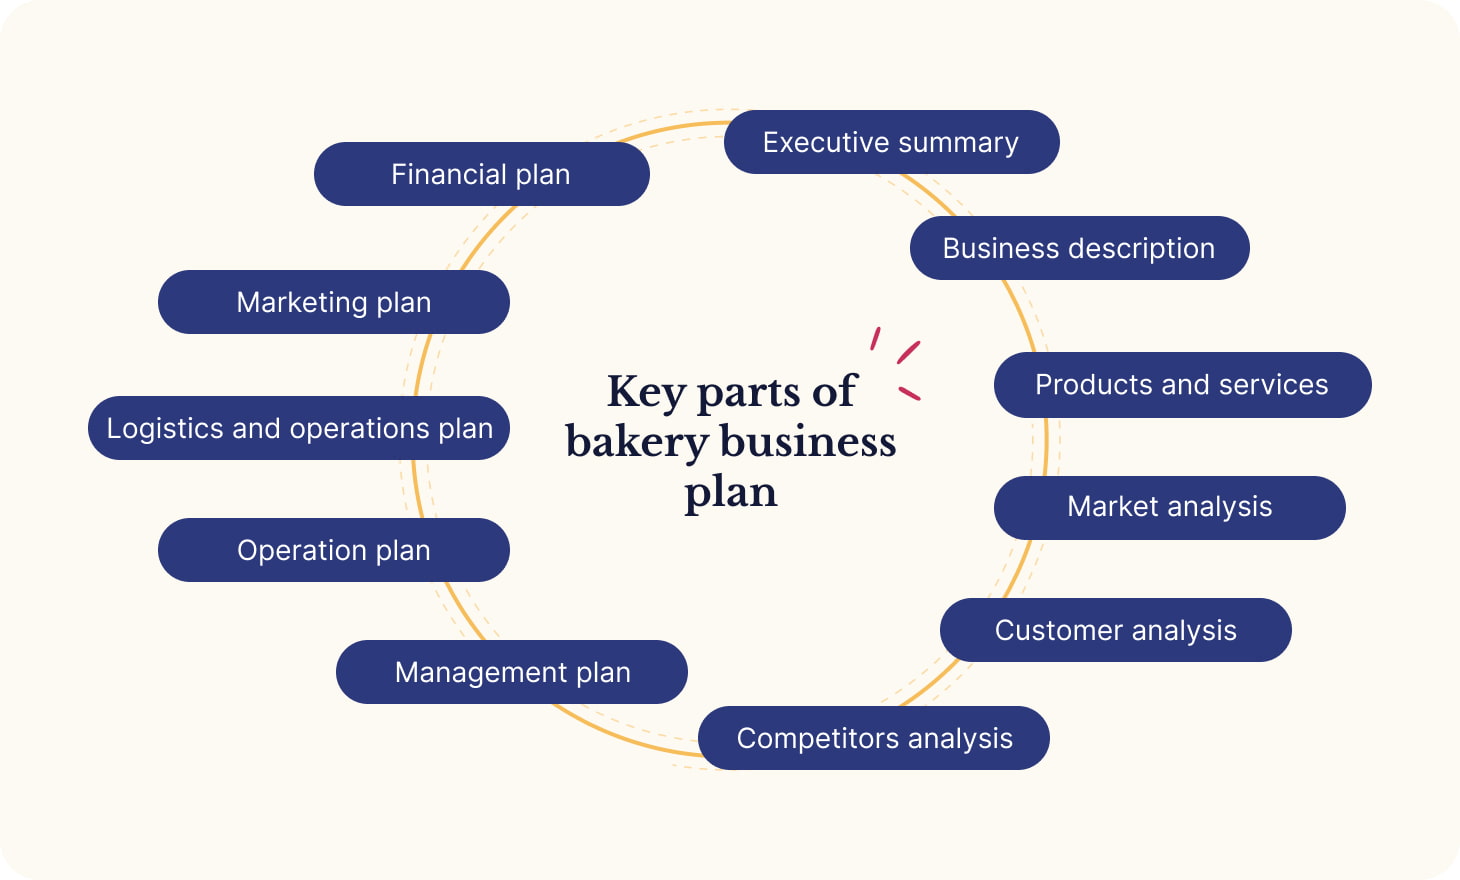 Key parts for bakery business plan